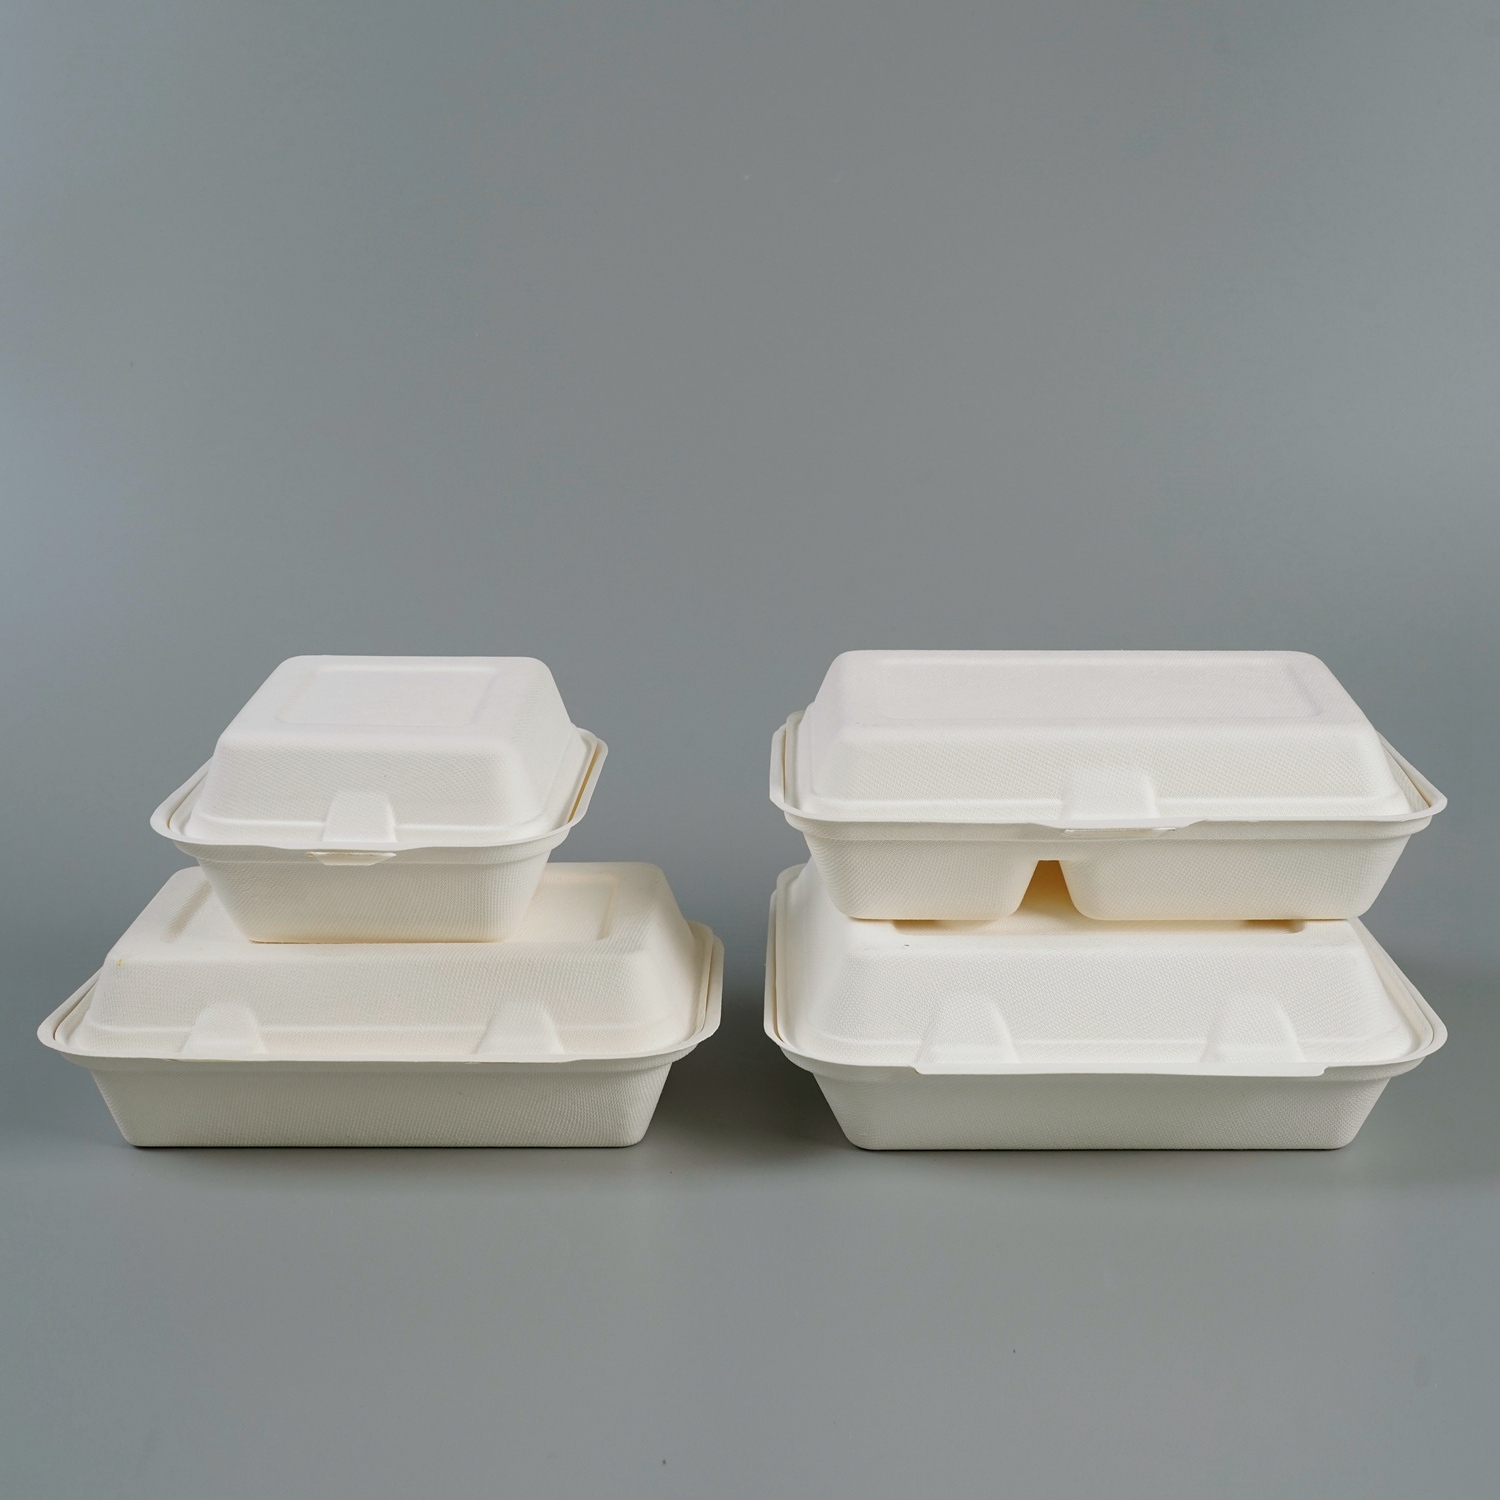 What is the differences between PFAS free and Normal Bagasse Food Packaging Products? Bagasse Food Container, Biodegradable Tableware, compostable and biodegraadable